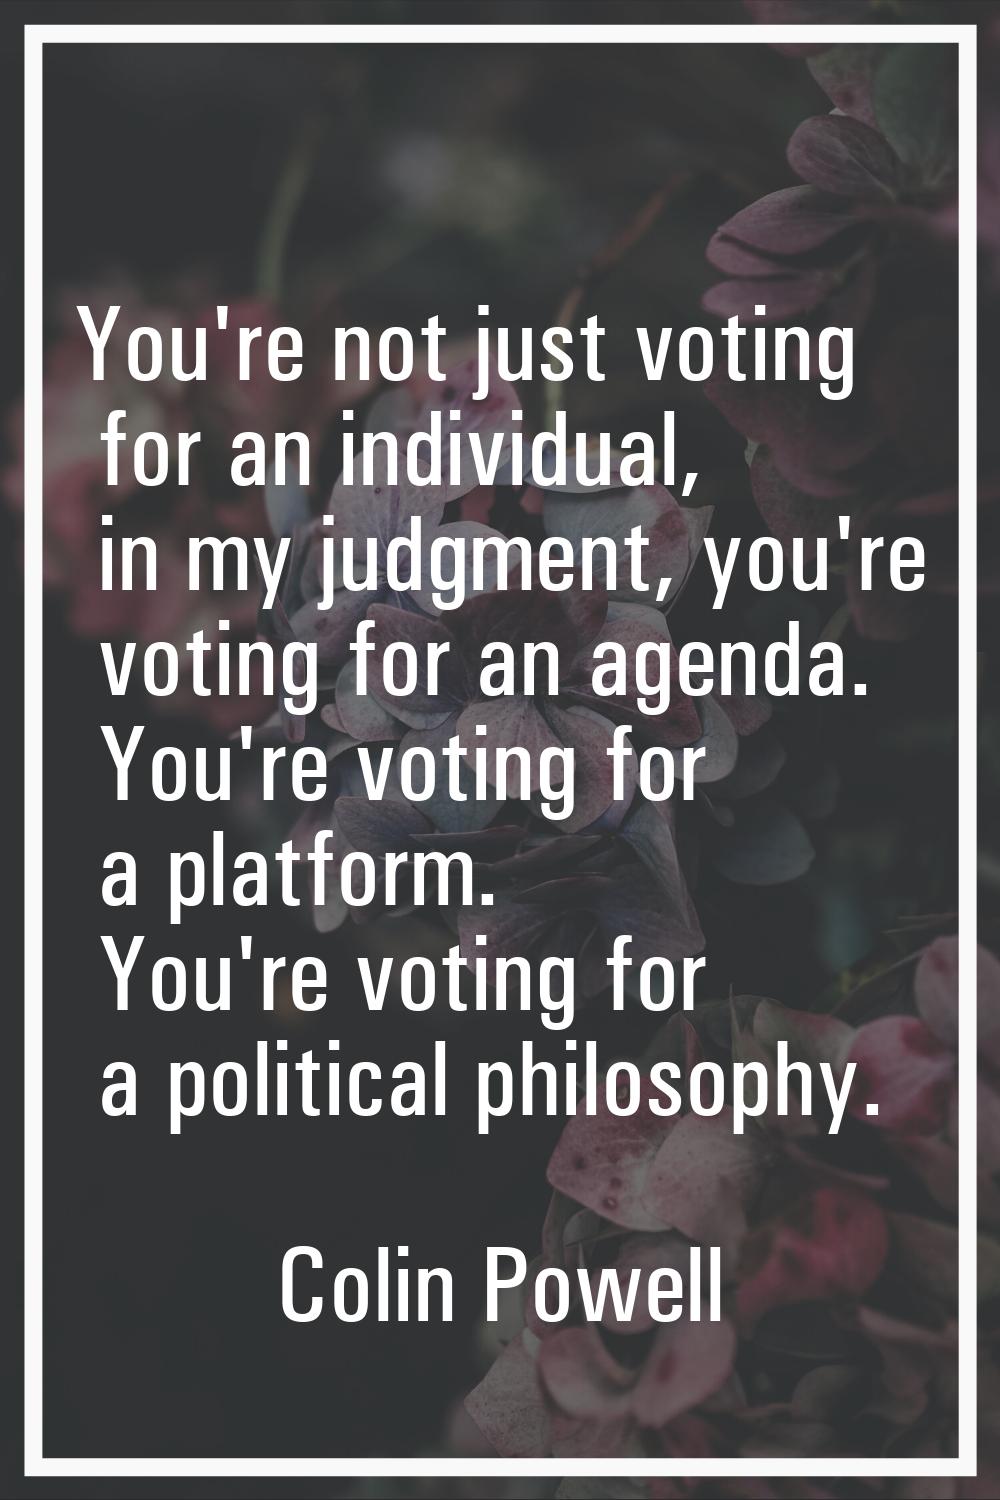 You're not just voting for an individual, in my judgment, you're voting for an agenda. You're votin